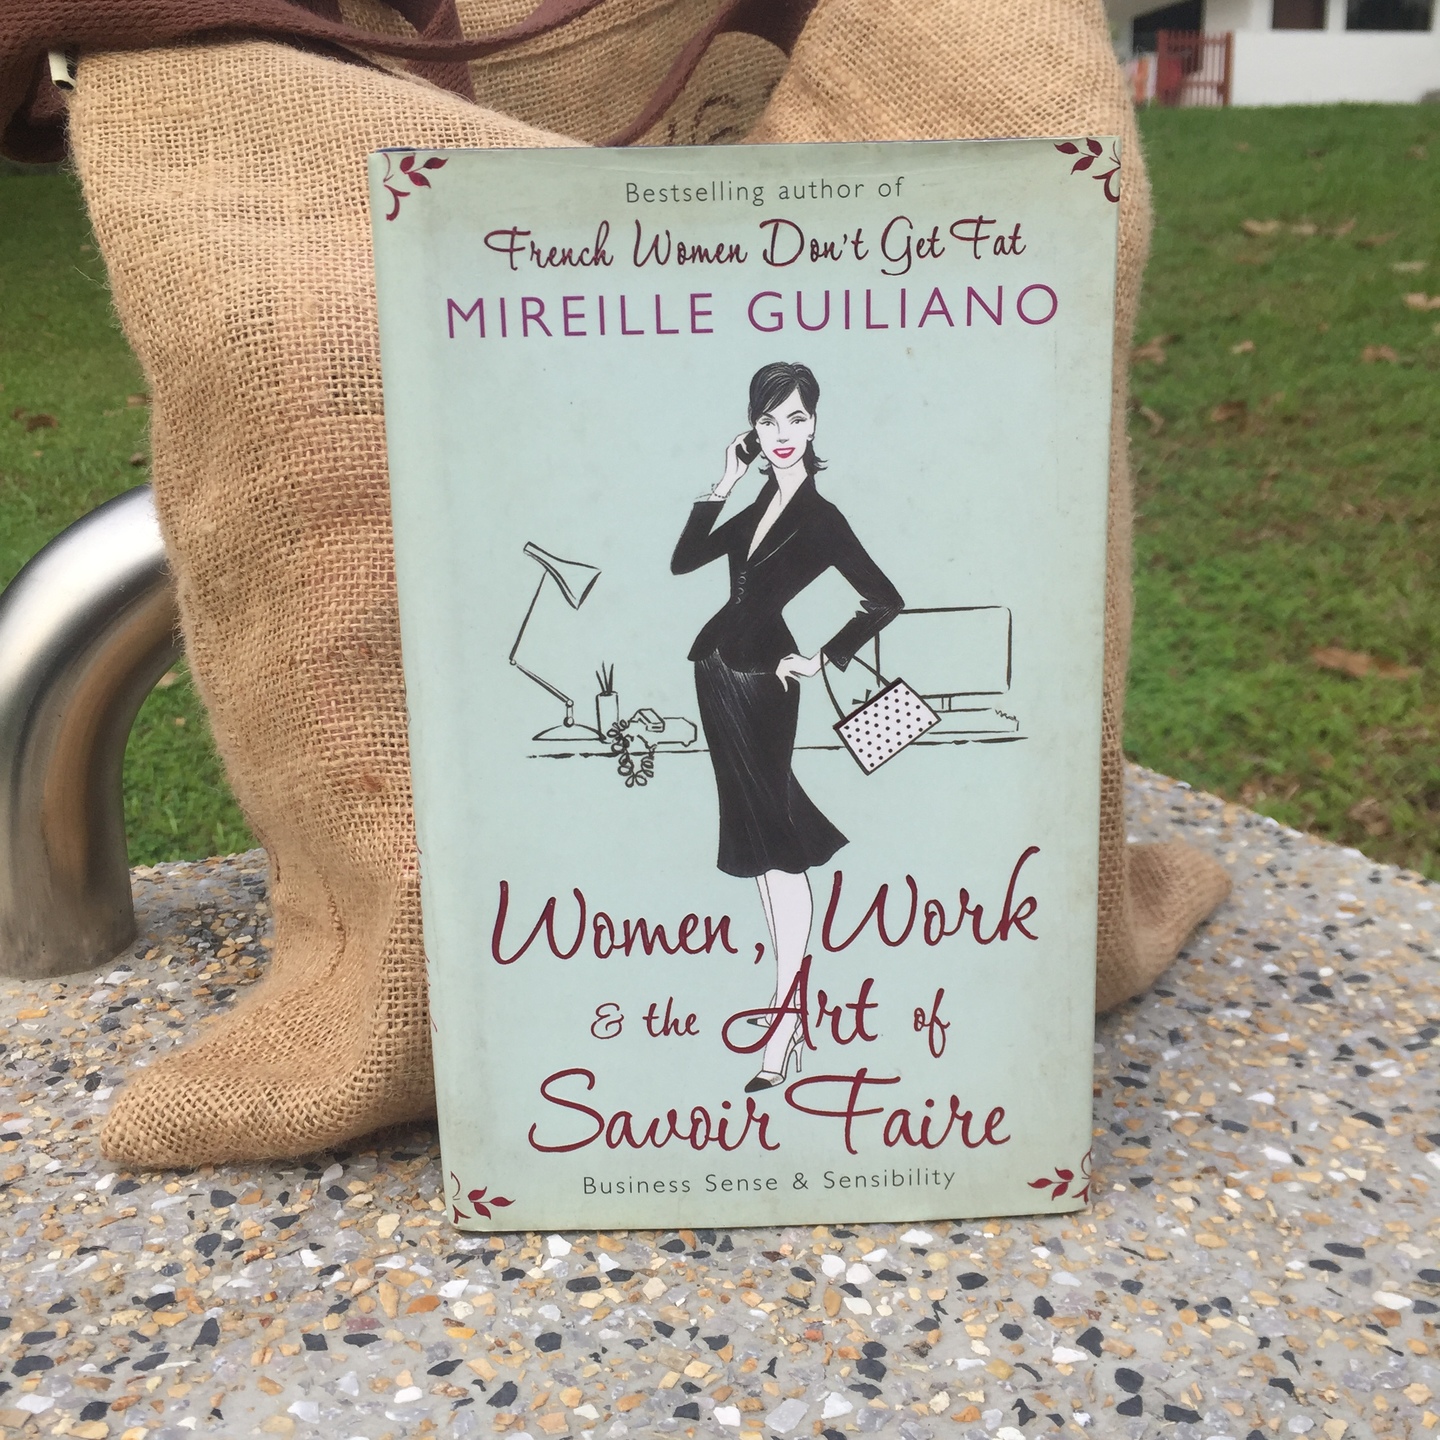 Women, Work & the Art of Savoir Faire by Mireille Guiliano Hardcover